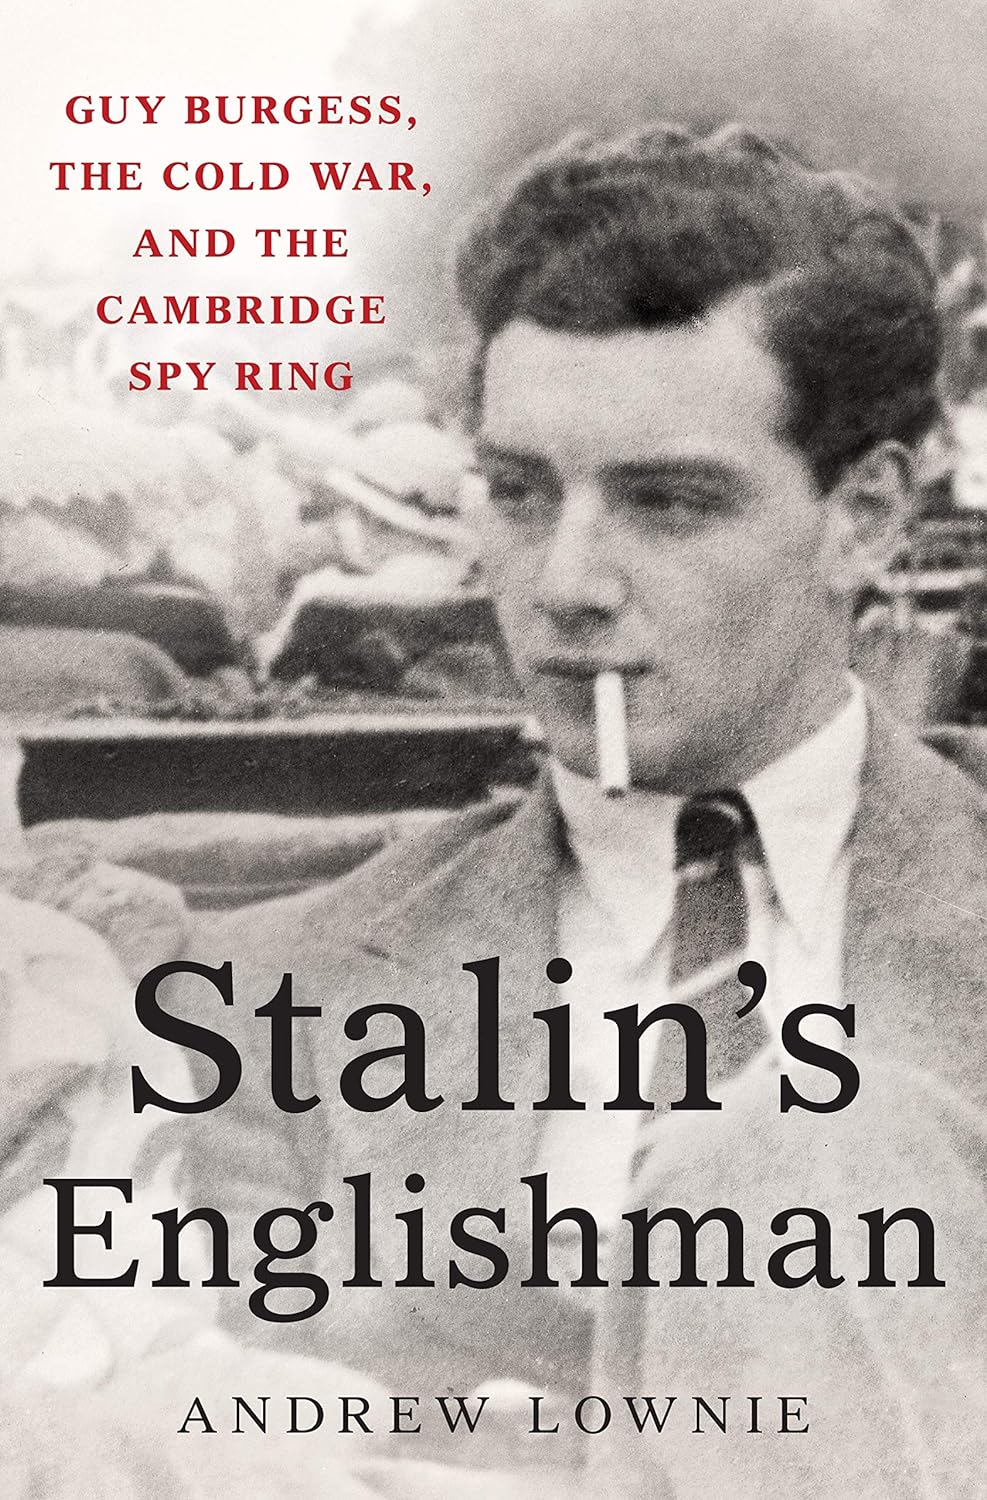 Stalin's Englishman Guy Burgess, the Cold War, and the Cambridge Spy Ring by Andrew Lownie